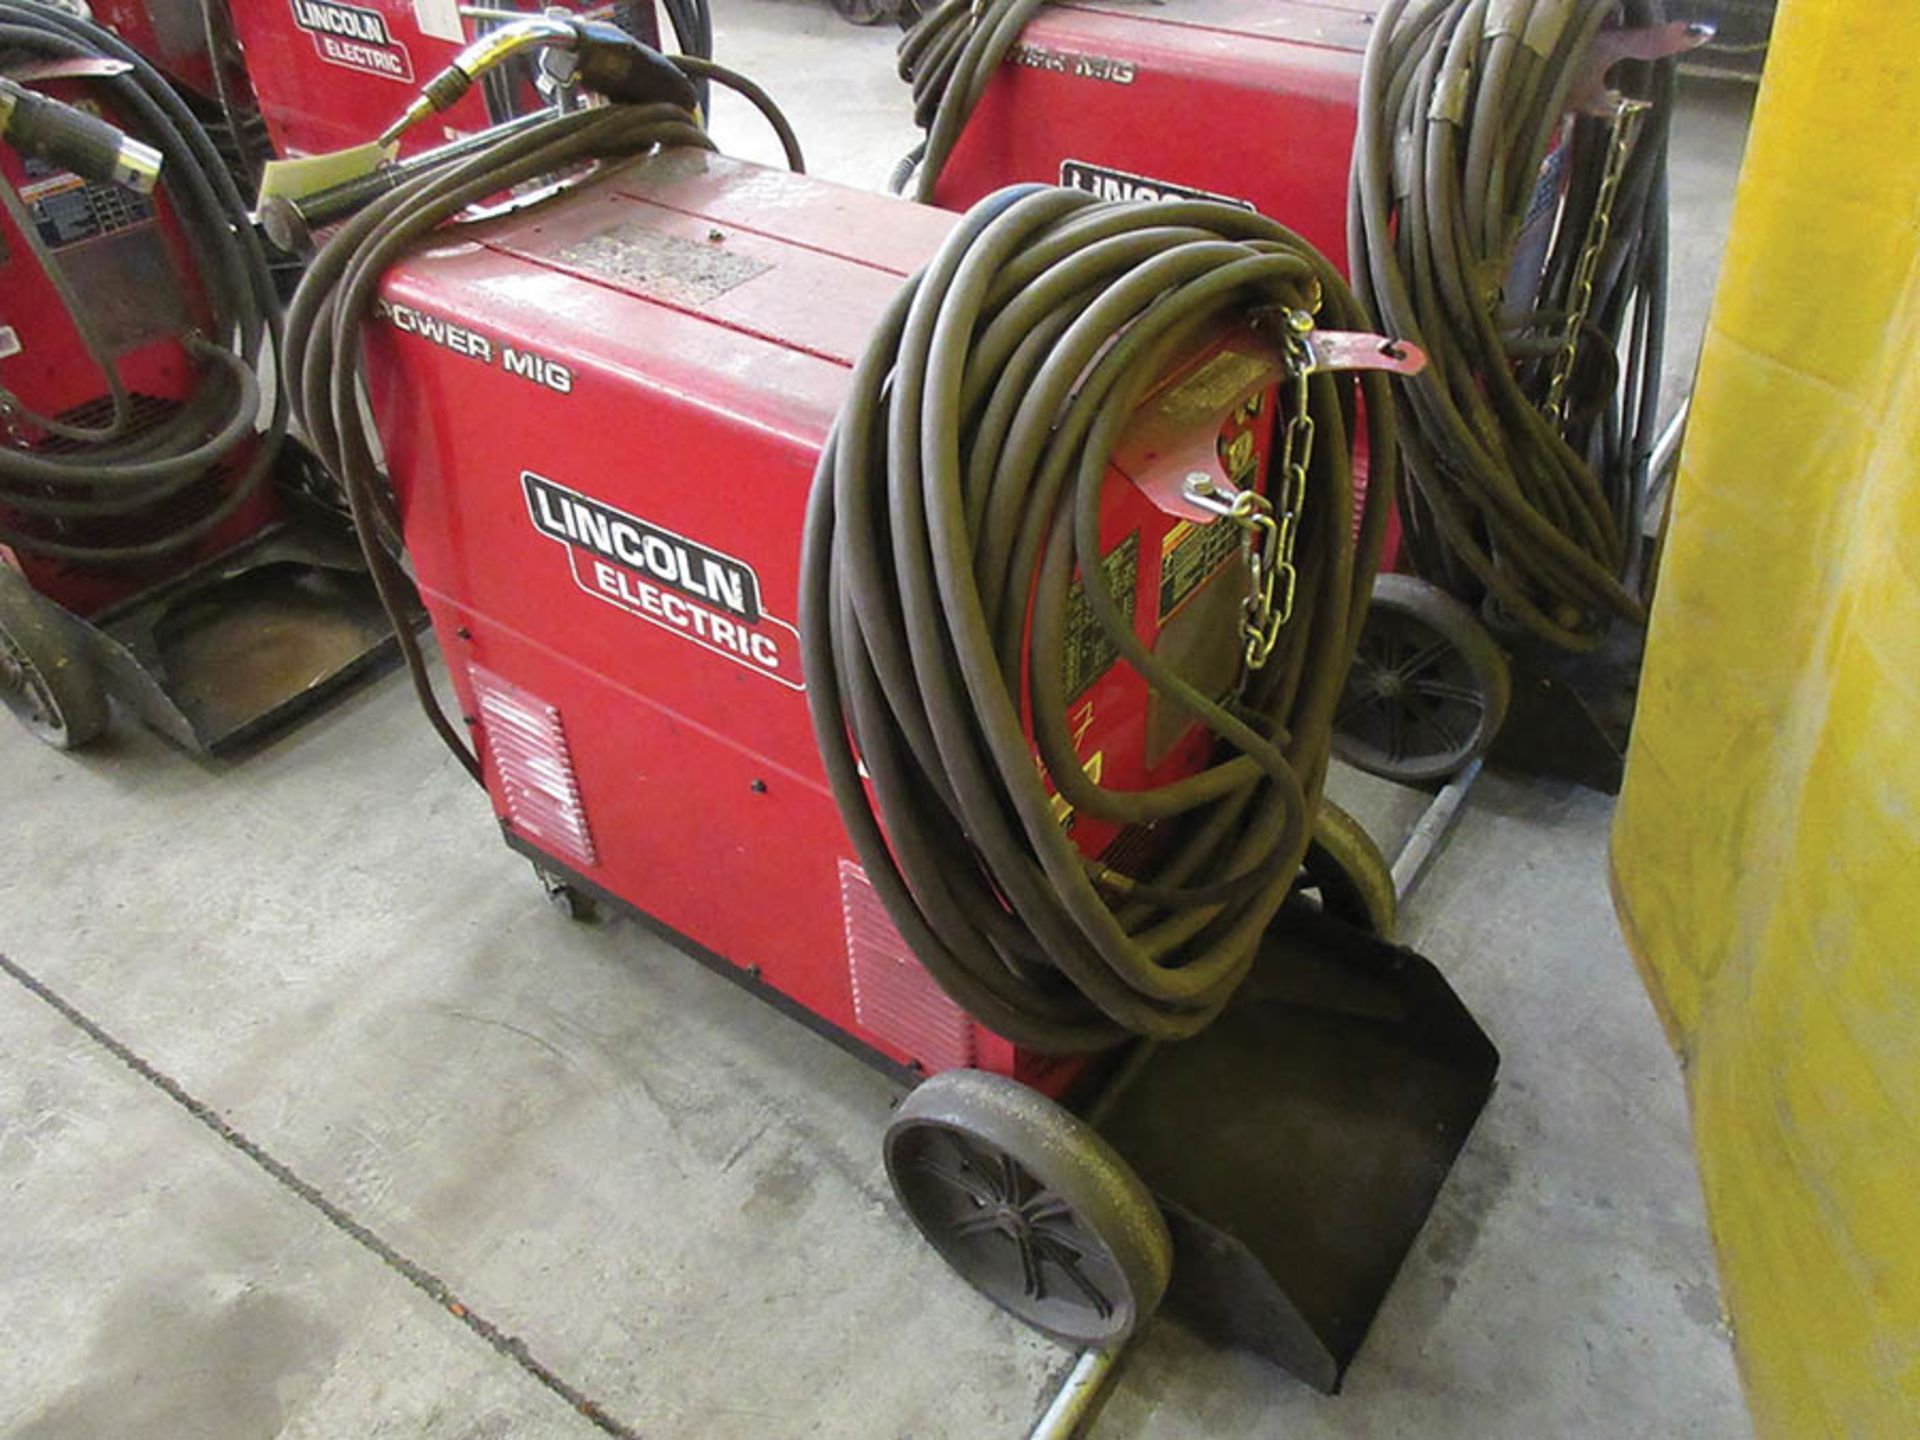 LINCOLN ELECTRIC 350MP POWER MIG WELDER WITH TWECO WELDSKILL MIG GUN, #57 - Image 2 of 3